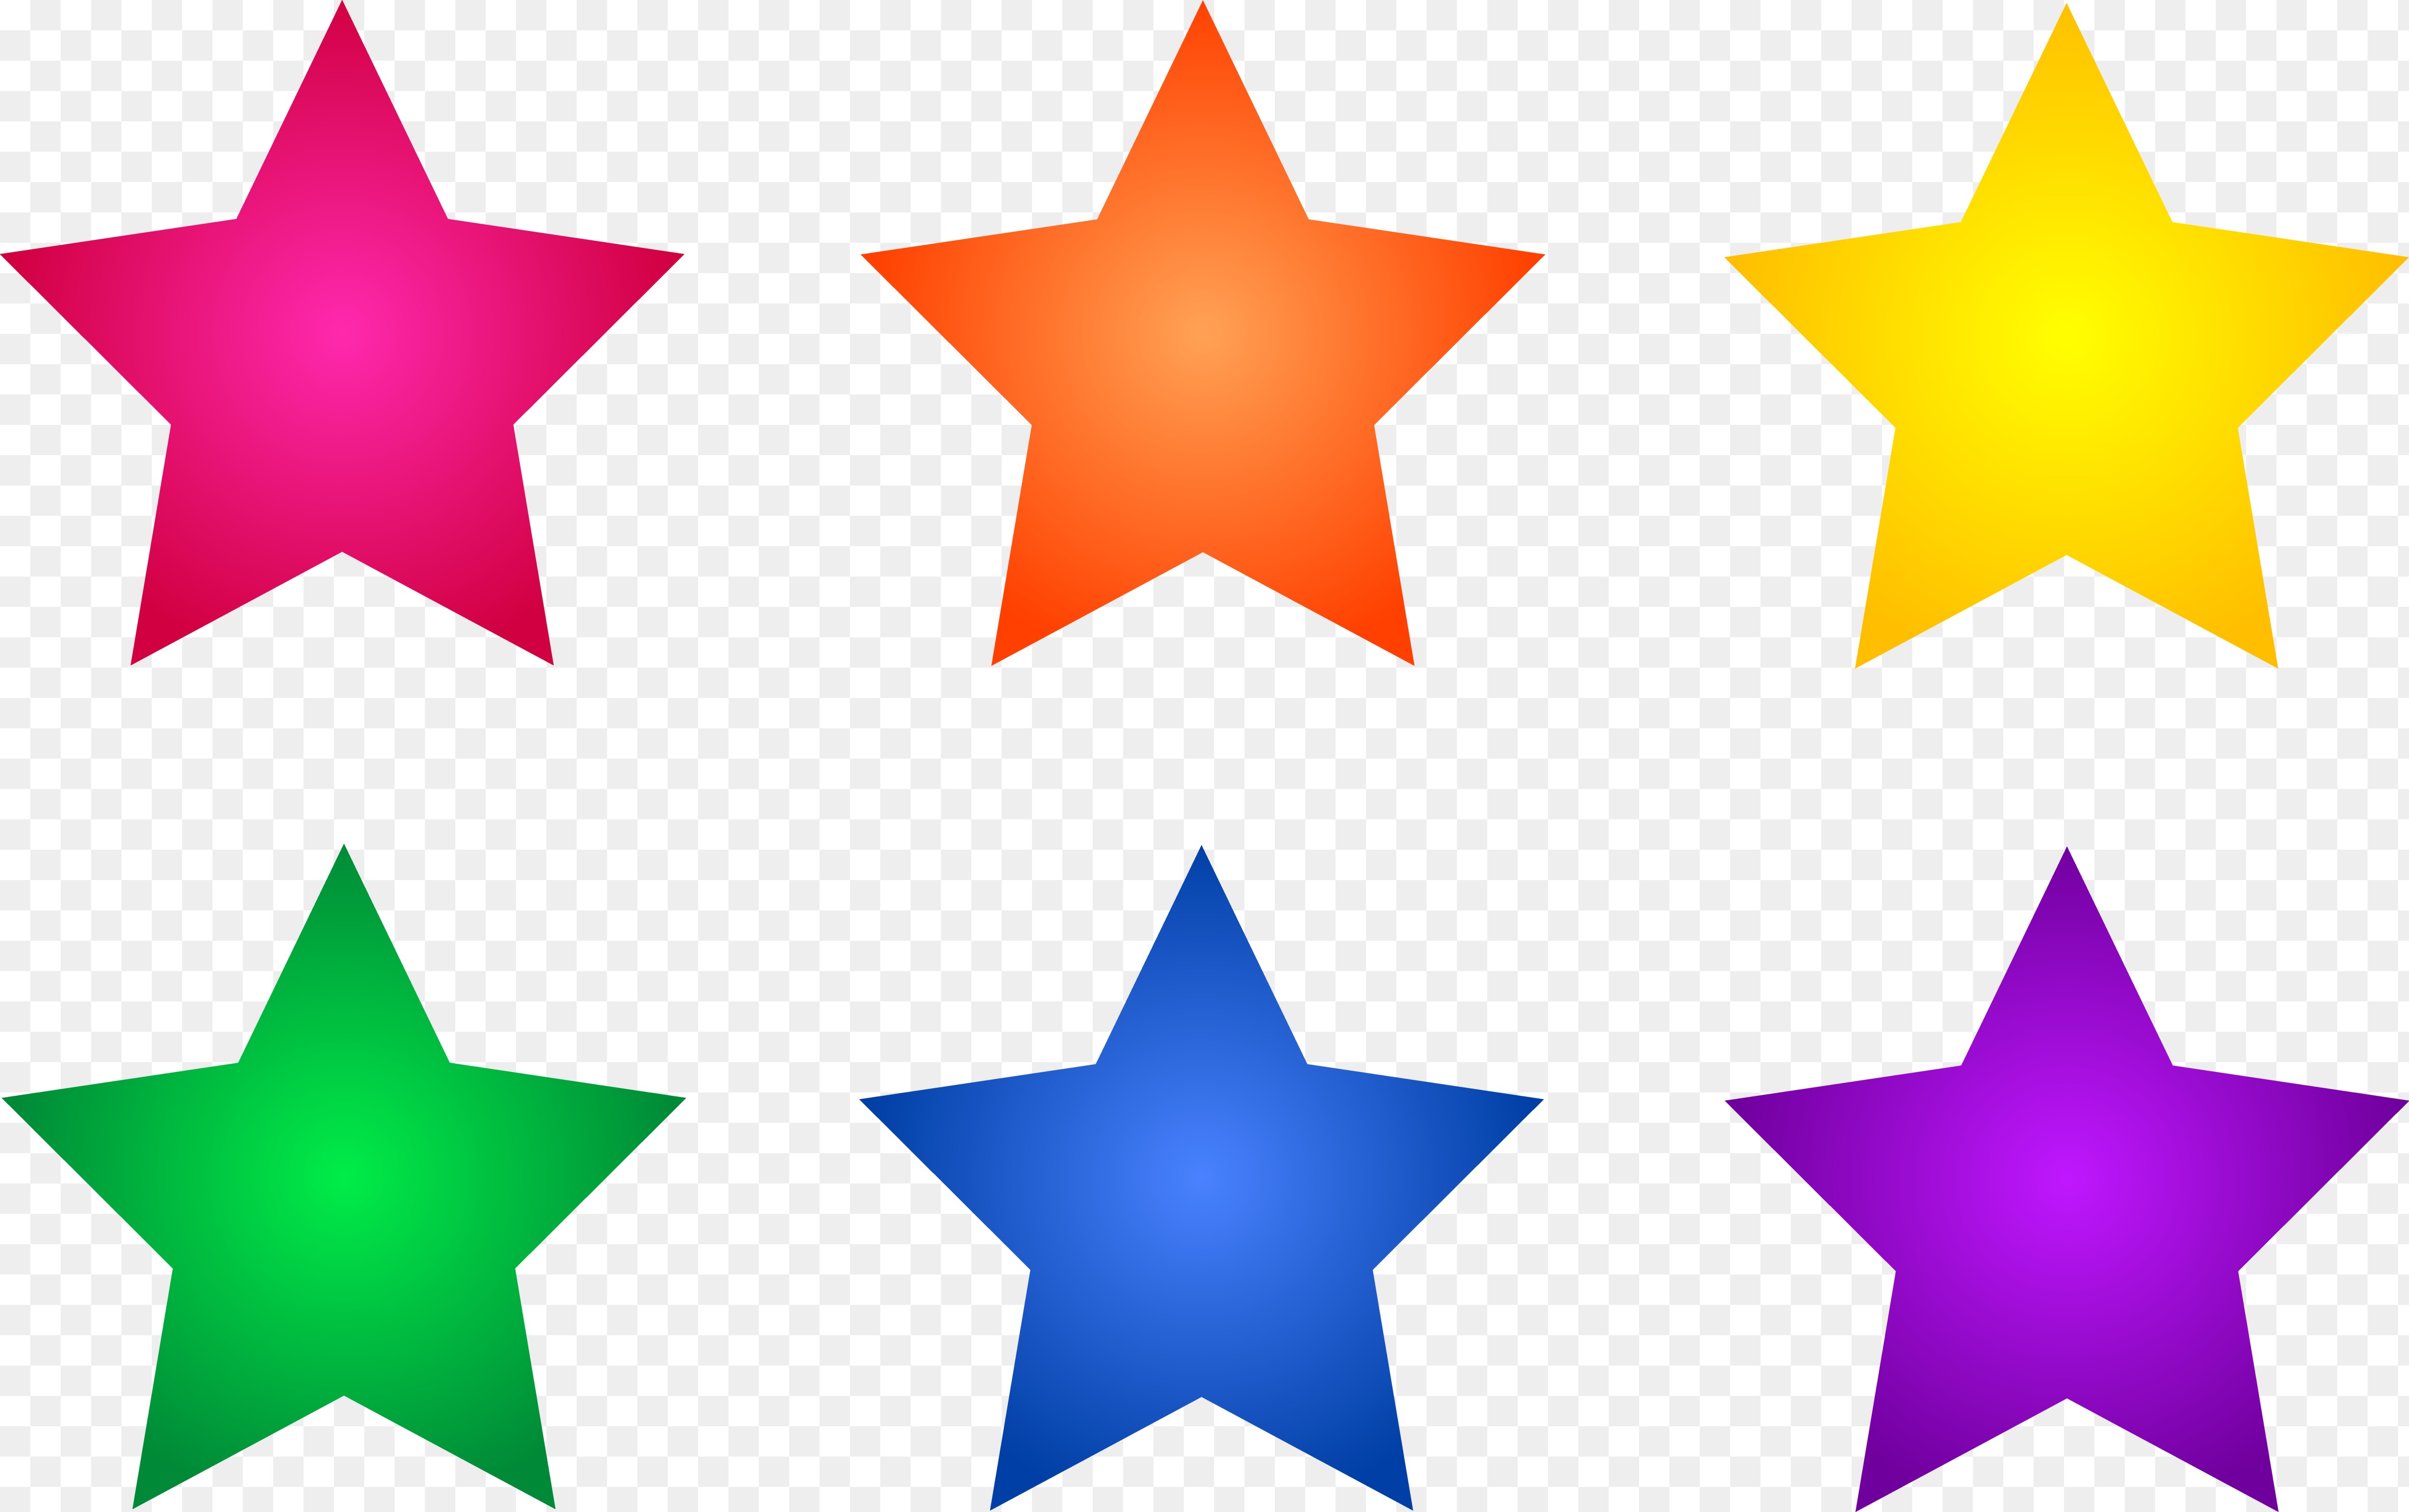 Gold star clipart no background free clipart image